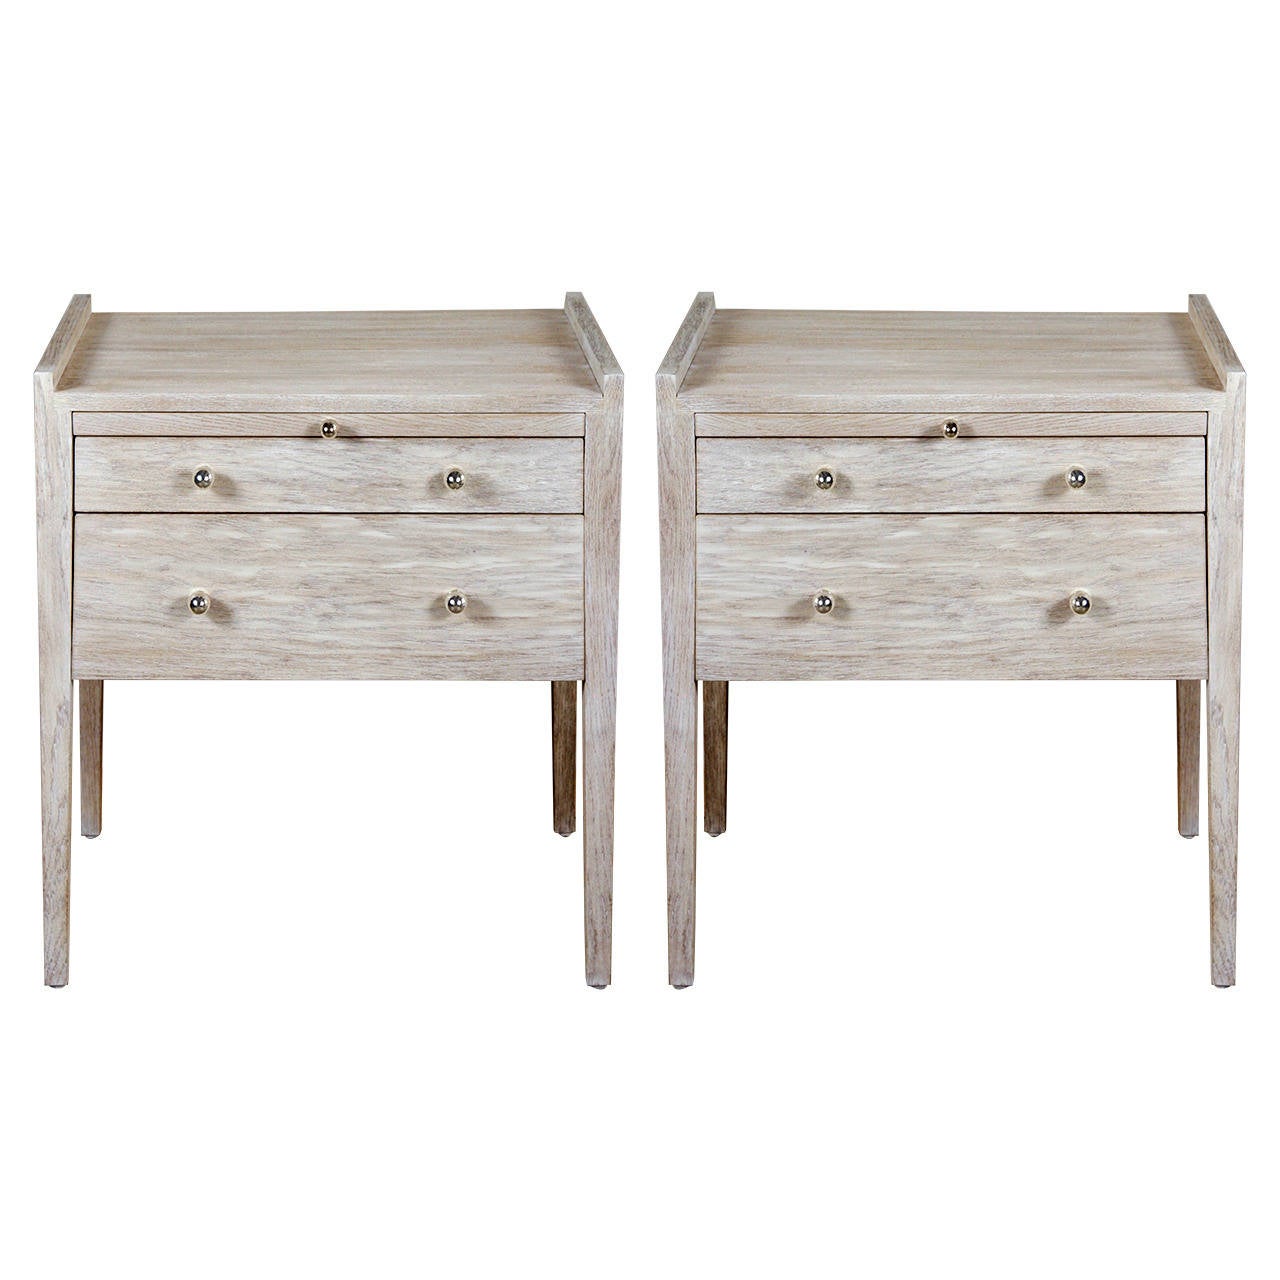 Pair of Distressed Side Tables or Nightstands with Pull-Out Tray